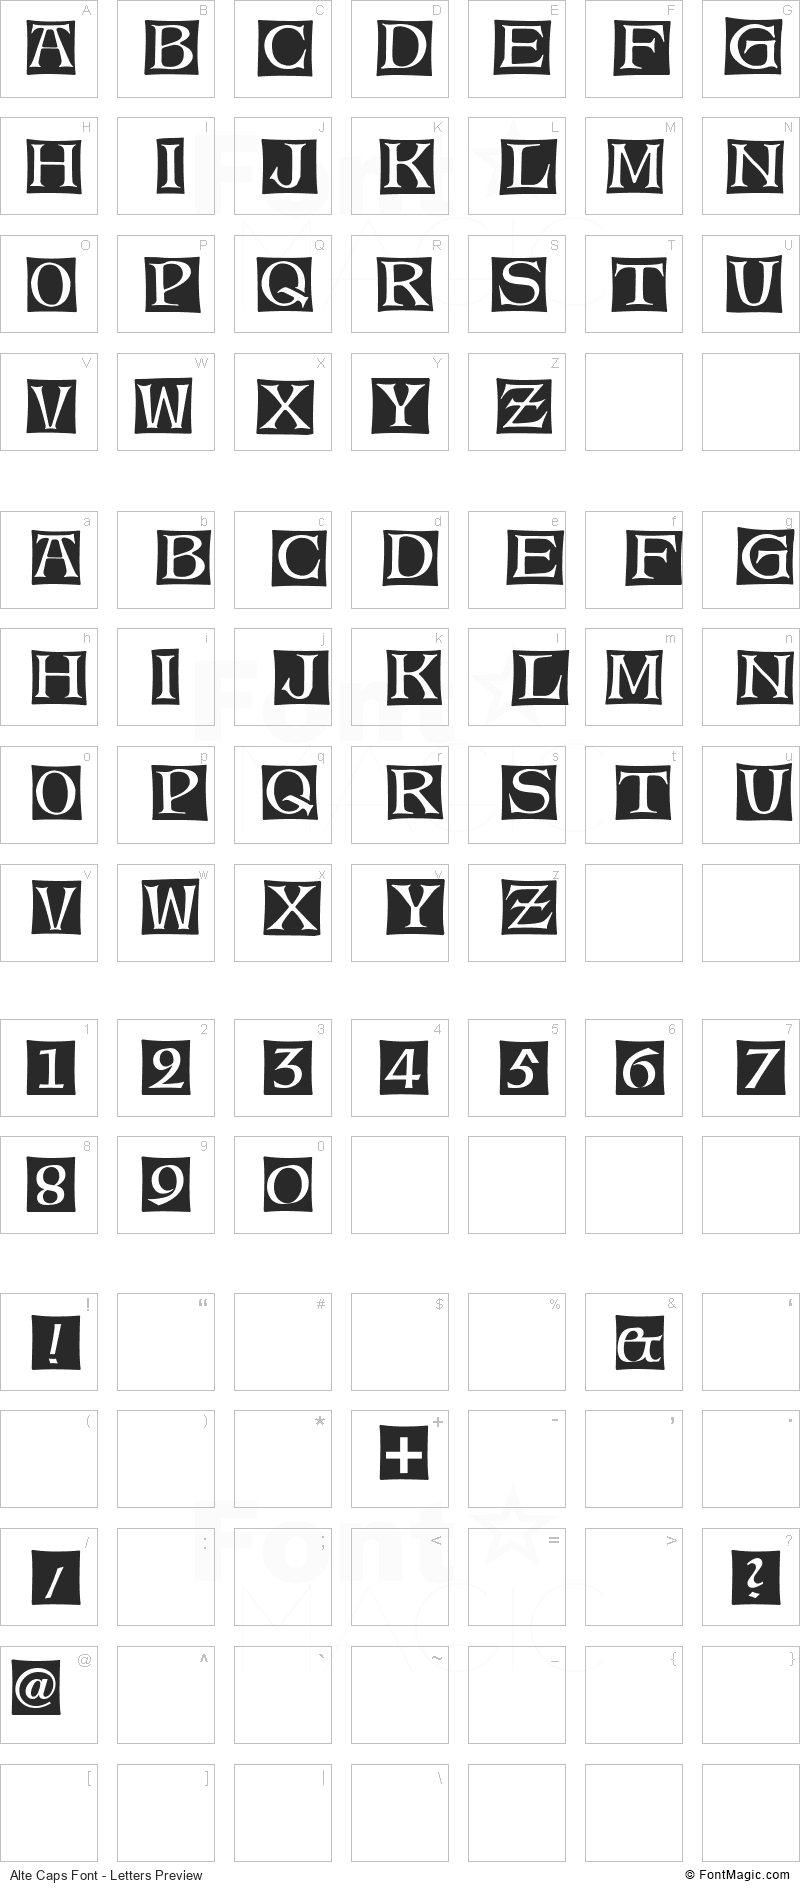 Alte Caps Font - All Latters Preview Chart